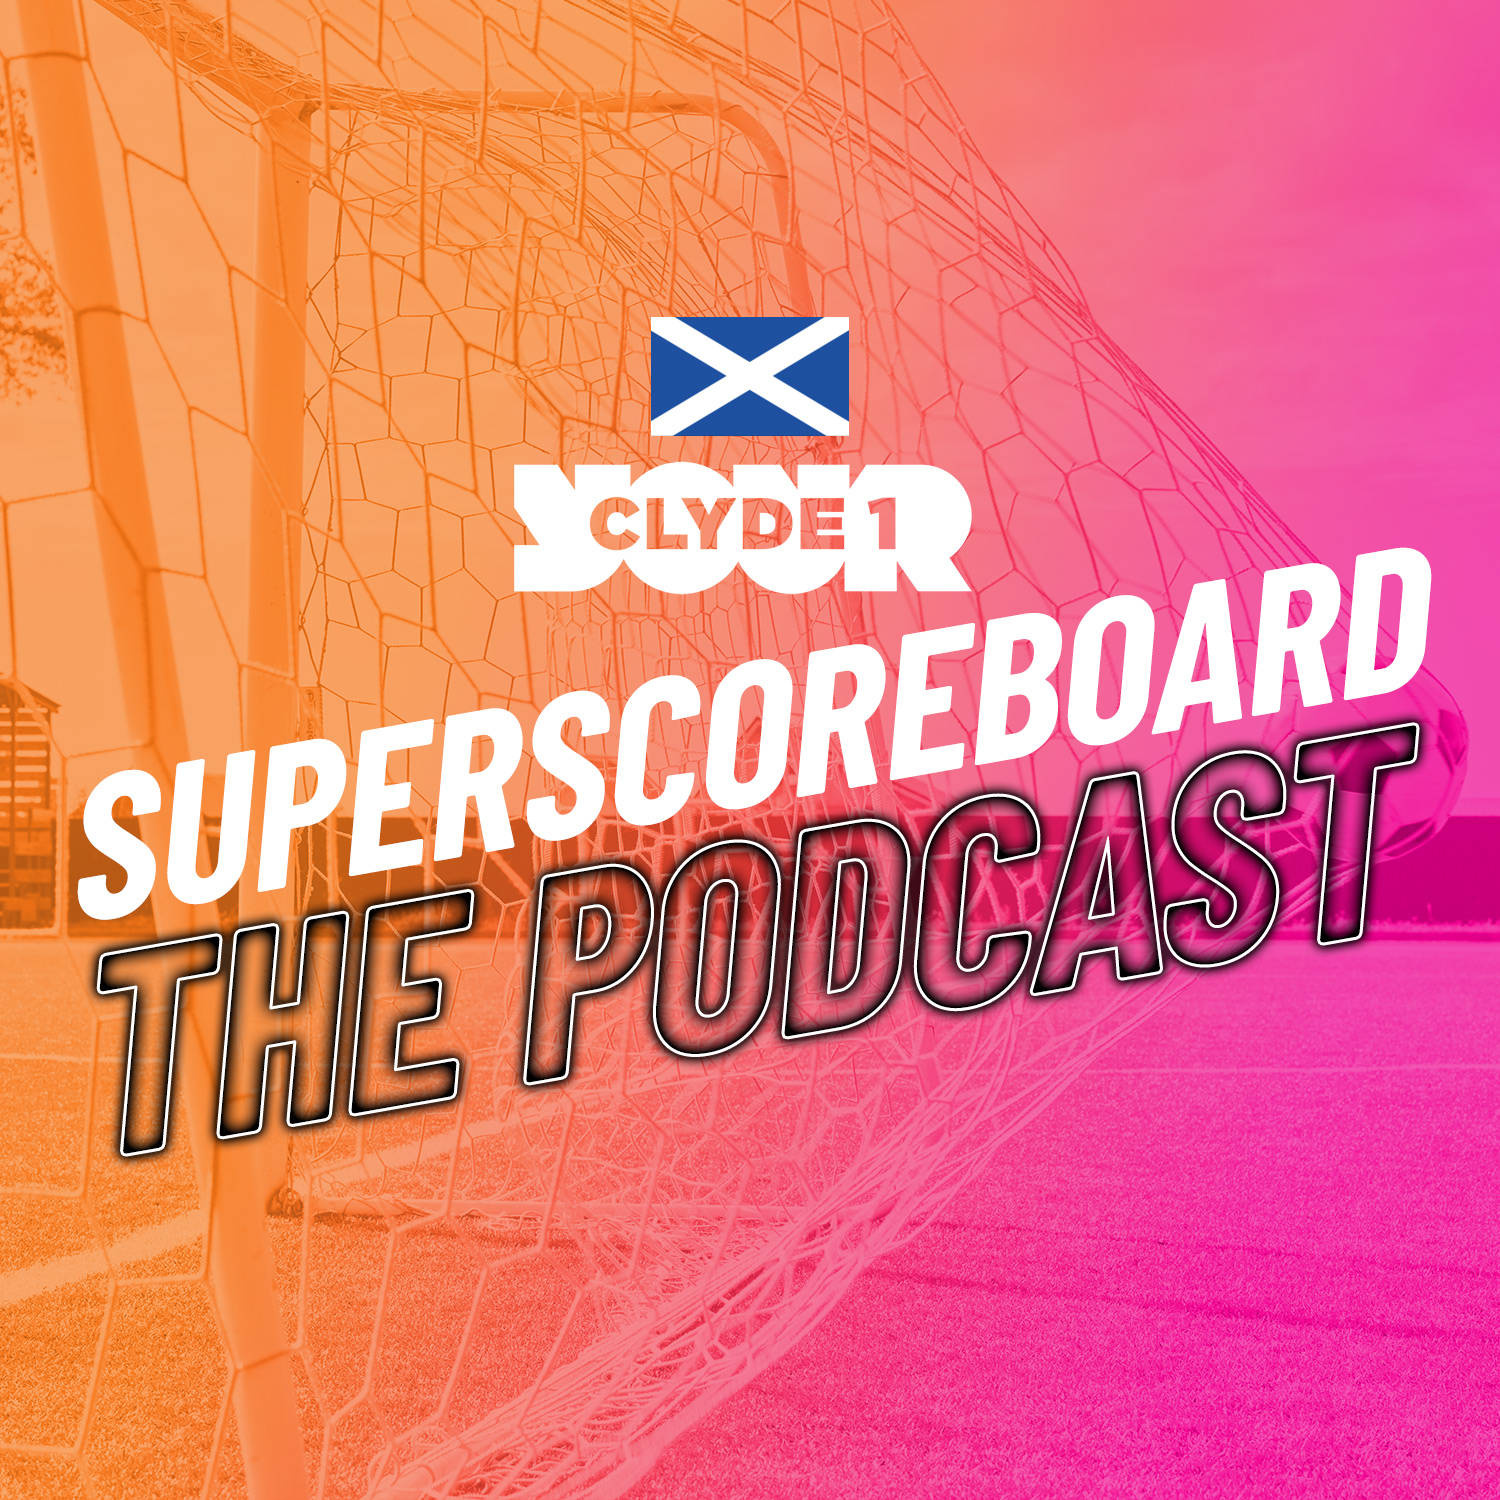 Superscoreboard Special | The Auld Firm